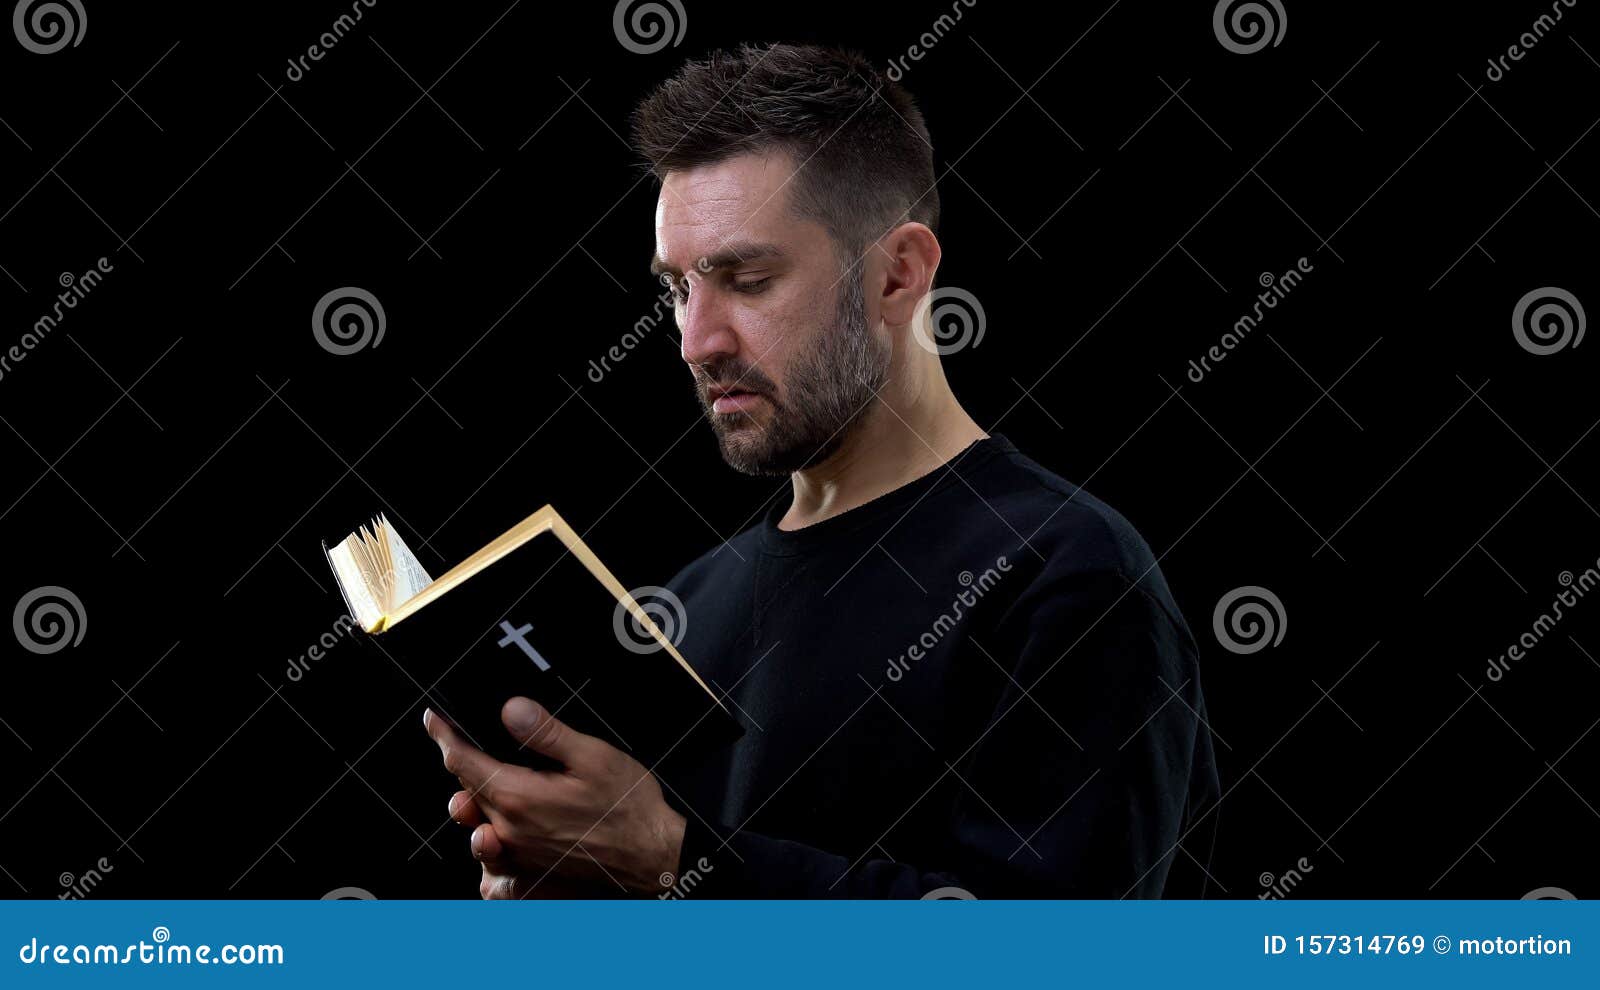 religious believer holding bible, finding answers to questions, faith in god